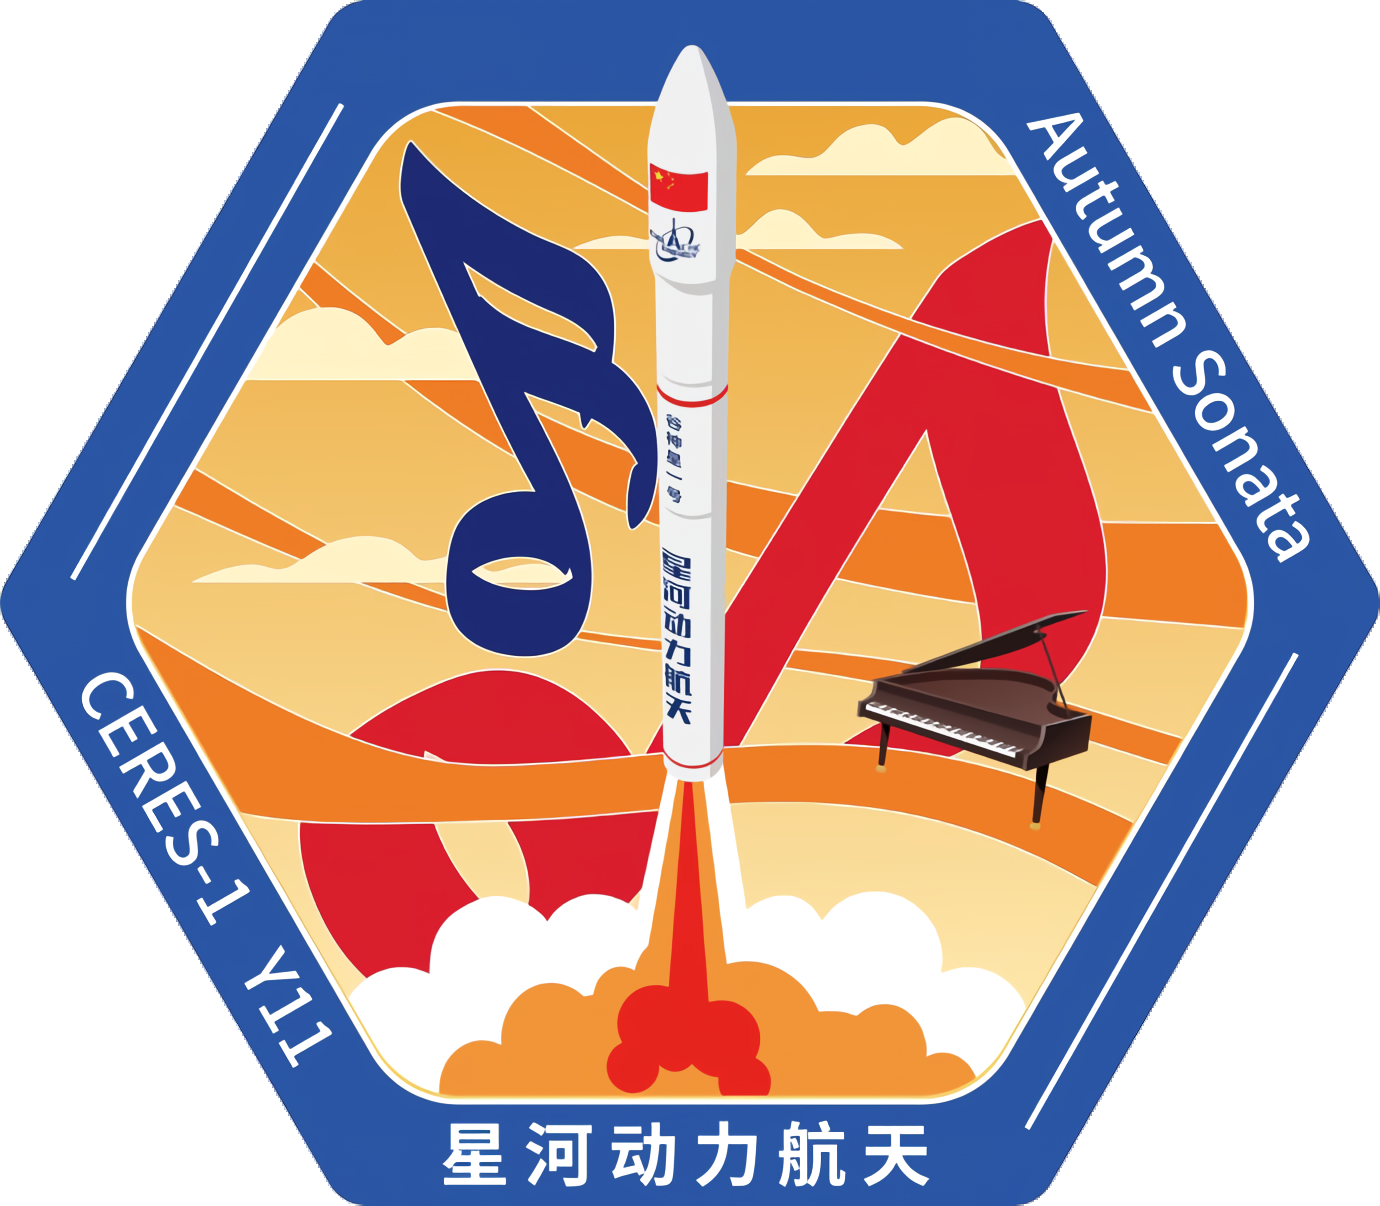 Mission patch for Jilin-1 High Resolution 04B